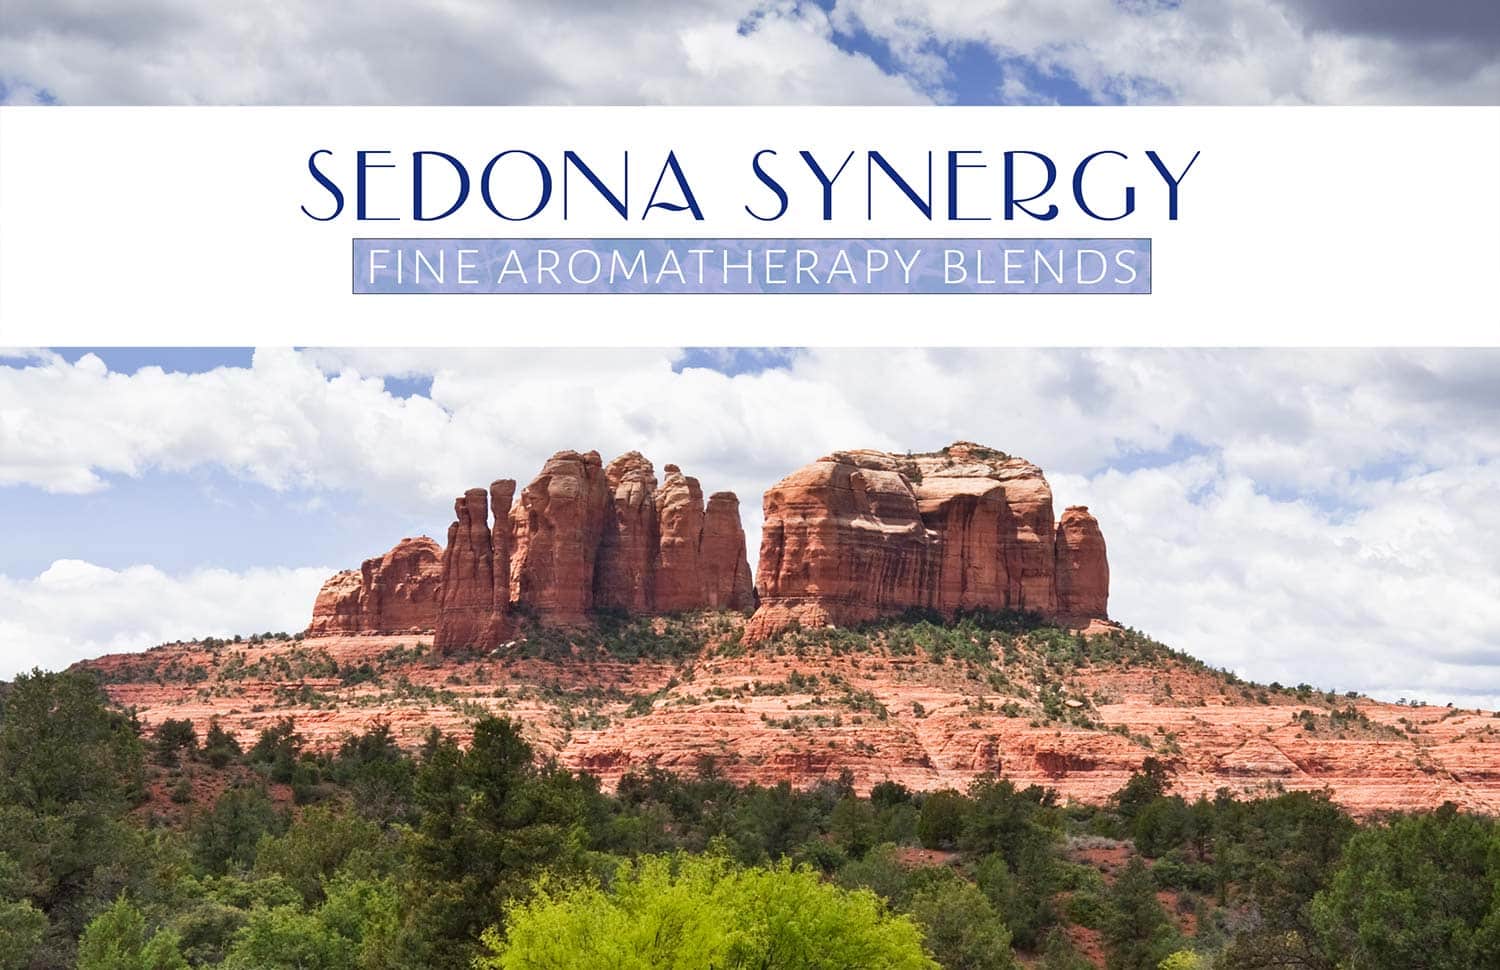 Sedona Synergy Fine Aromatherapy Blends, made exclusively with essential oils from Sedona, Northern & Central Arizona.